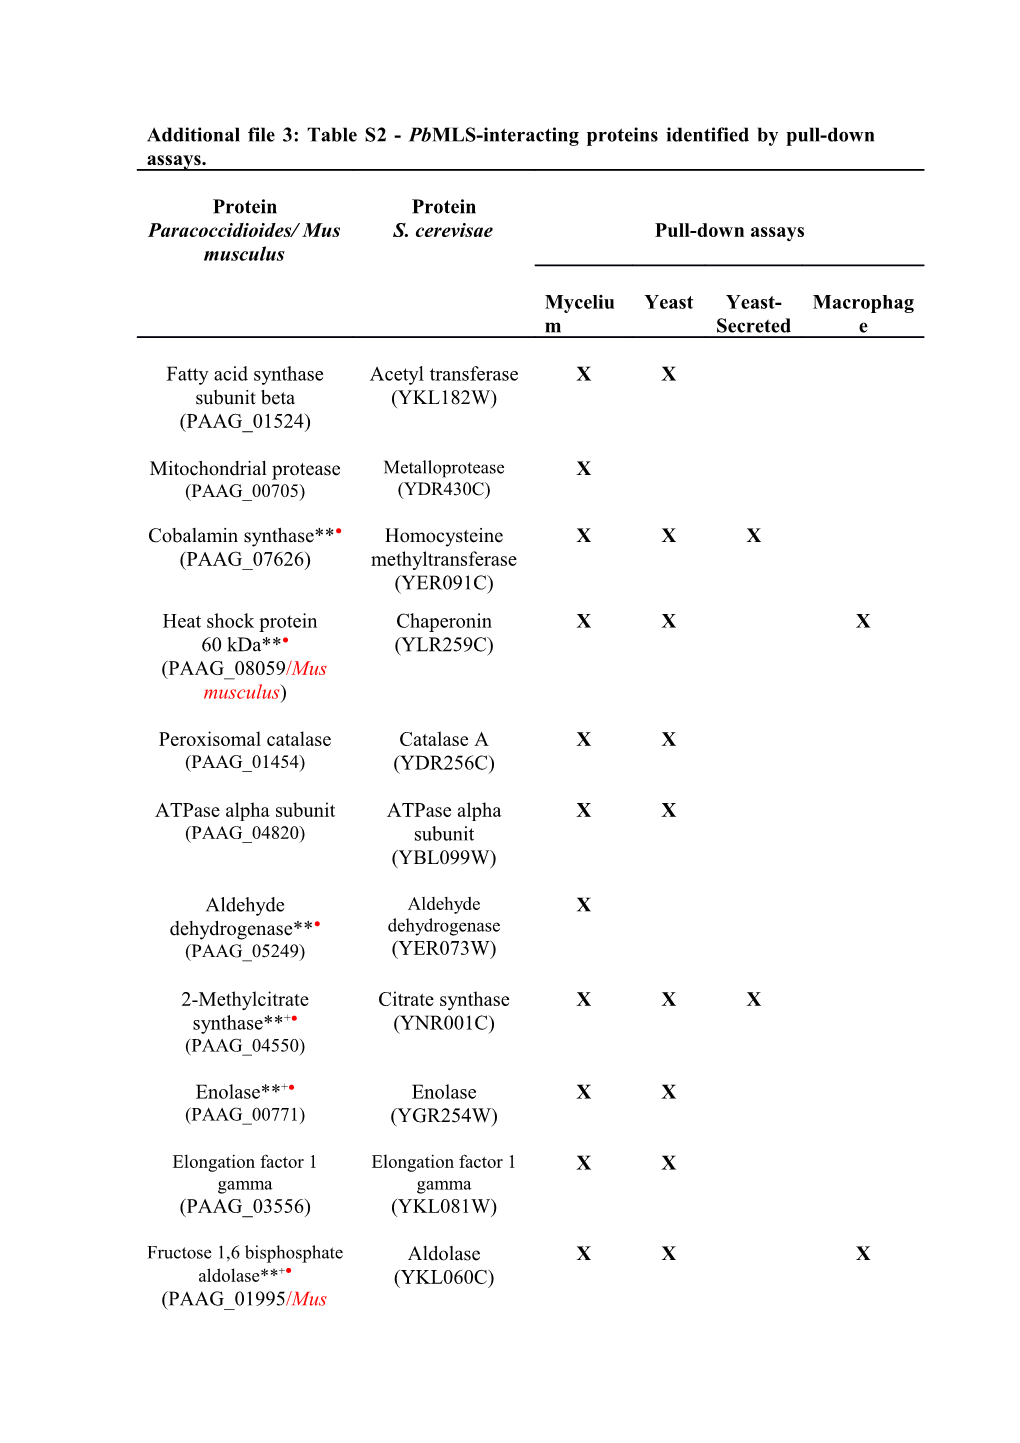 Additional File 3: Table S2 - Pbmls-Interacting Proteins Identified by Pull-Down Assays